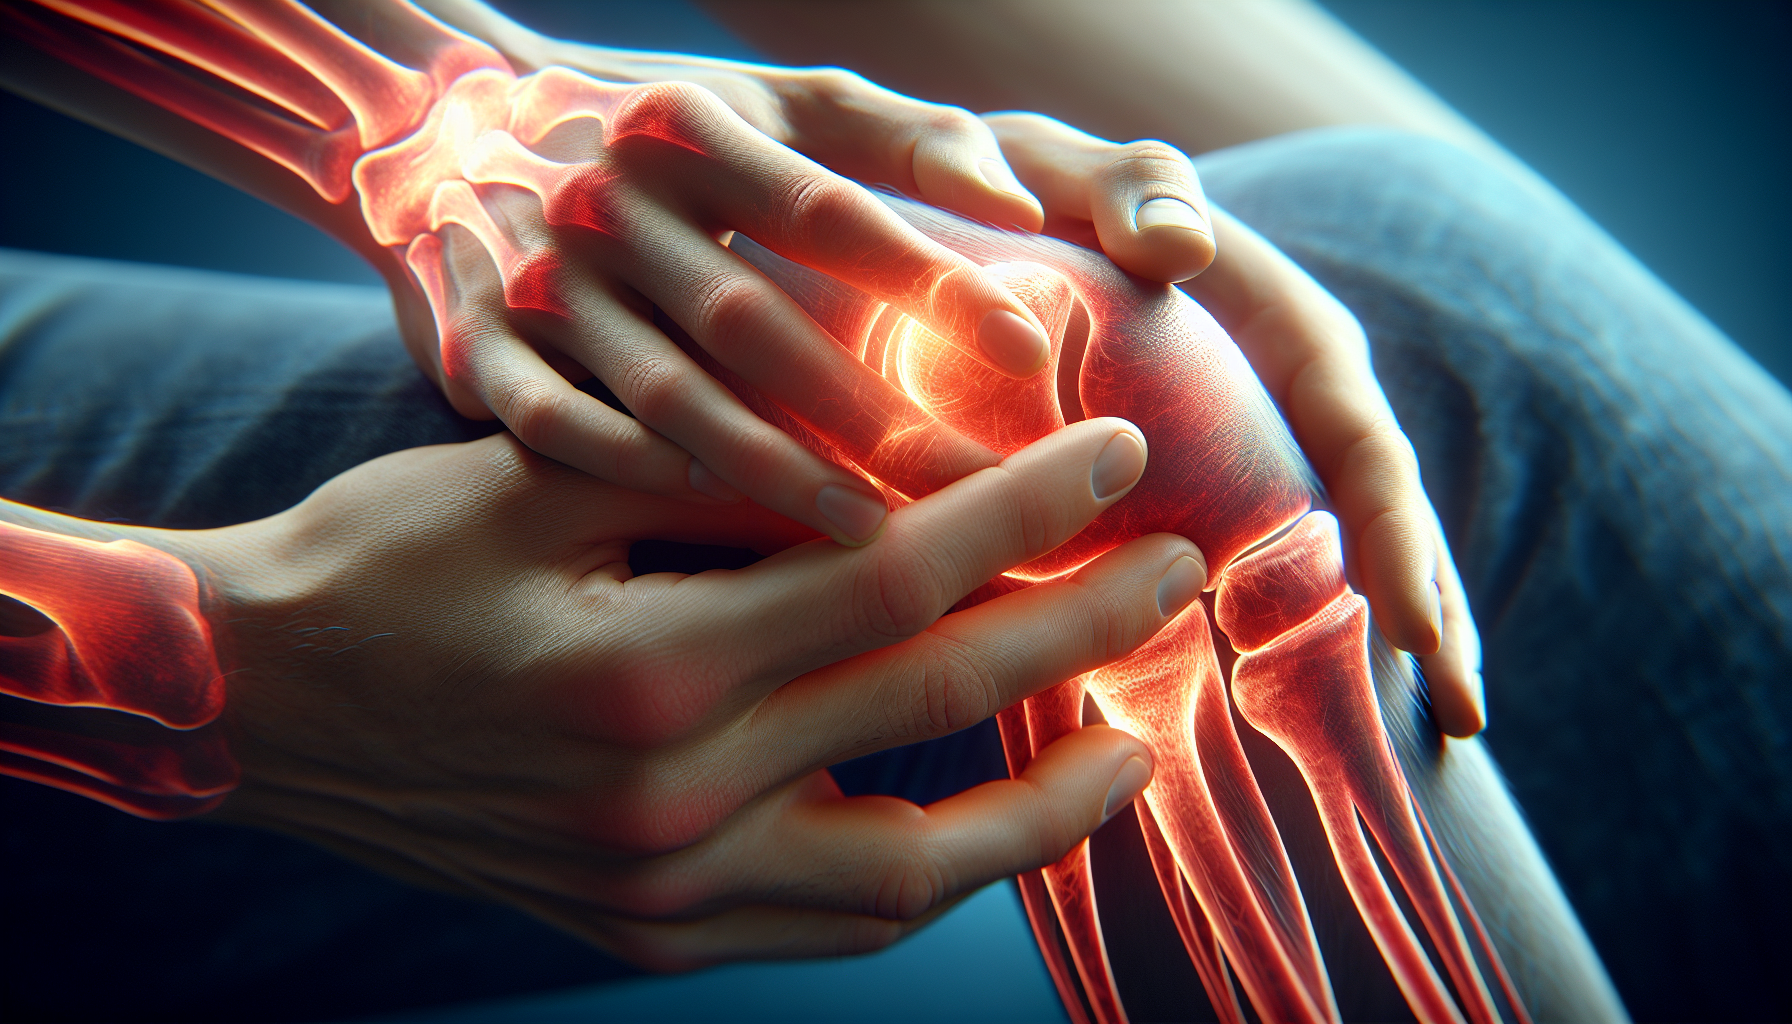 What Can You Do For Unbearable Arthritis Pain?